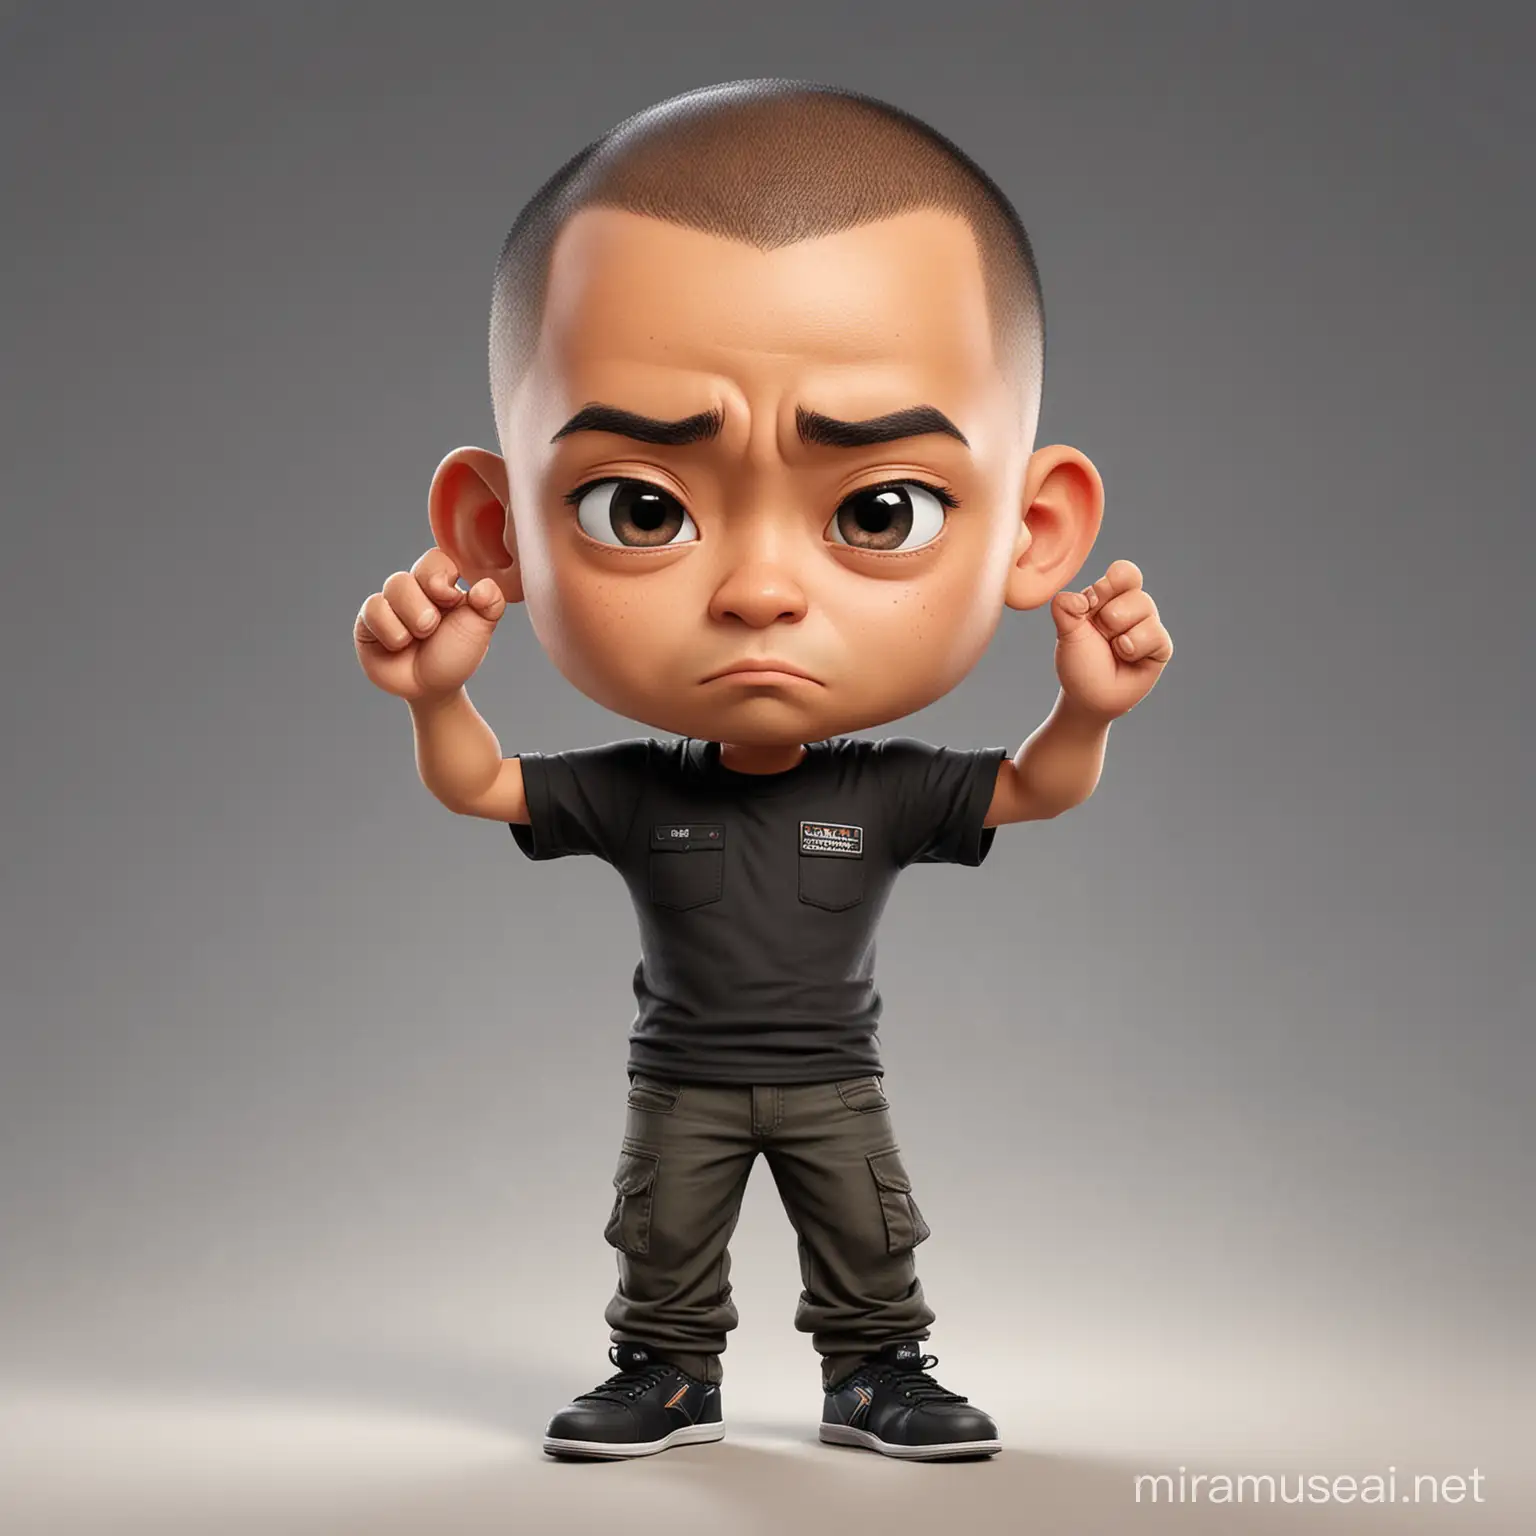 Chibi caricature medium potrait, A 40 year old Indonesian man, short thin hair, buzz cut, big head, wearing a black t-shirt, cargo pants, is placing his right hand on his forehead as if looking for or looking at something, realistic